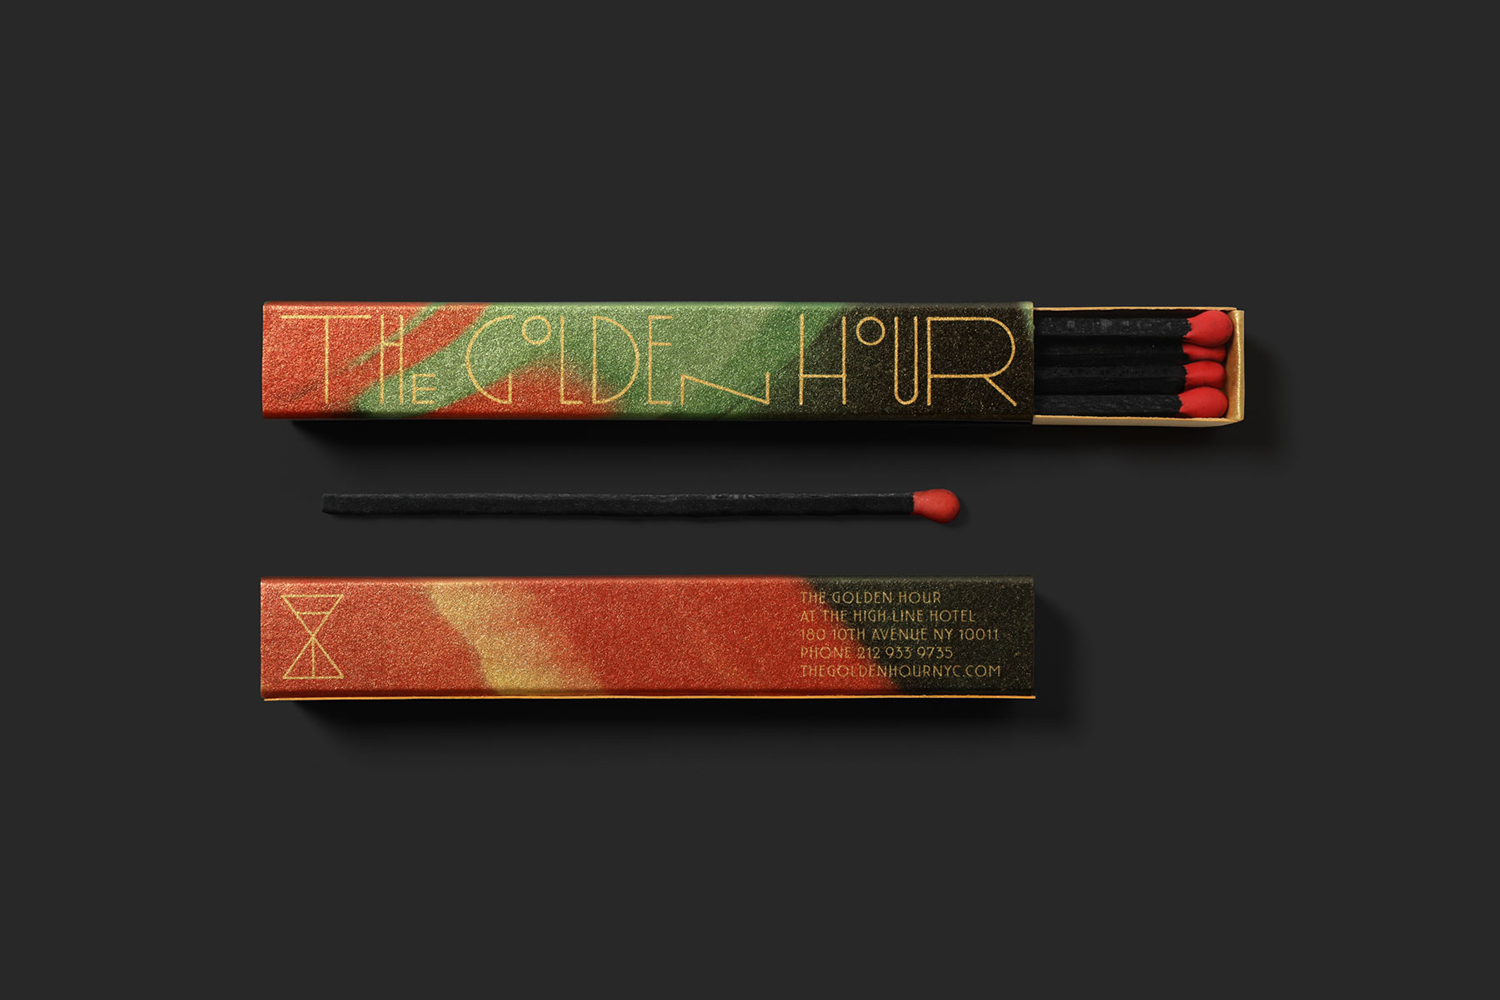 New Graphic Identity and matchboxes for The Golden Hour by Triboro